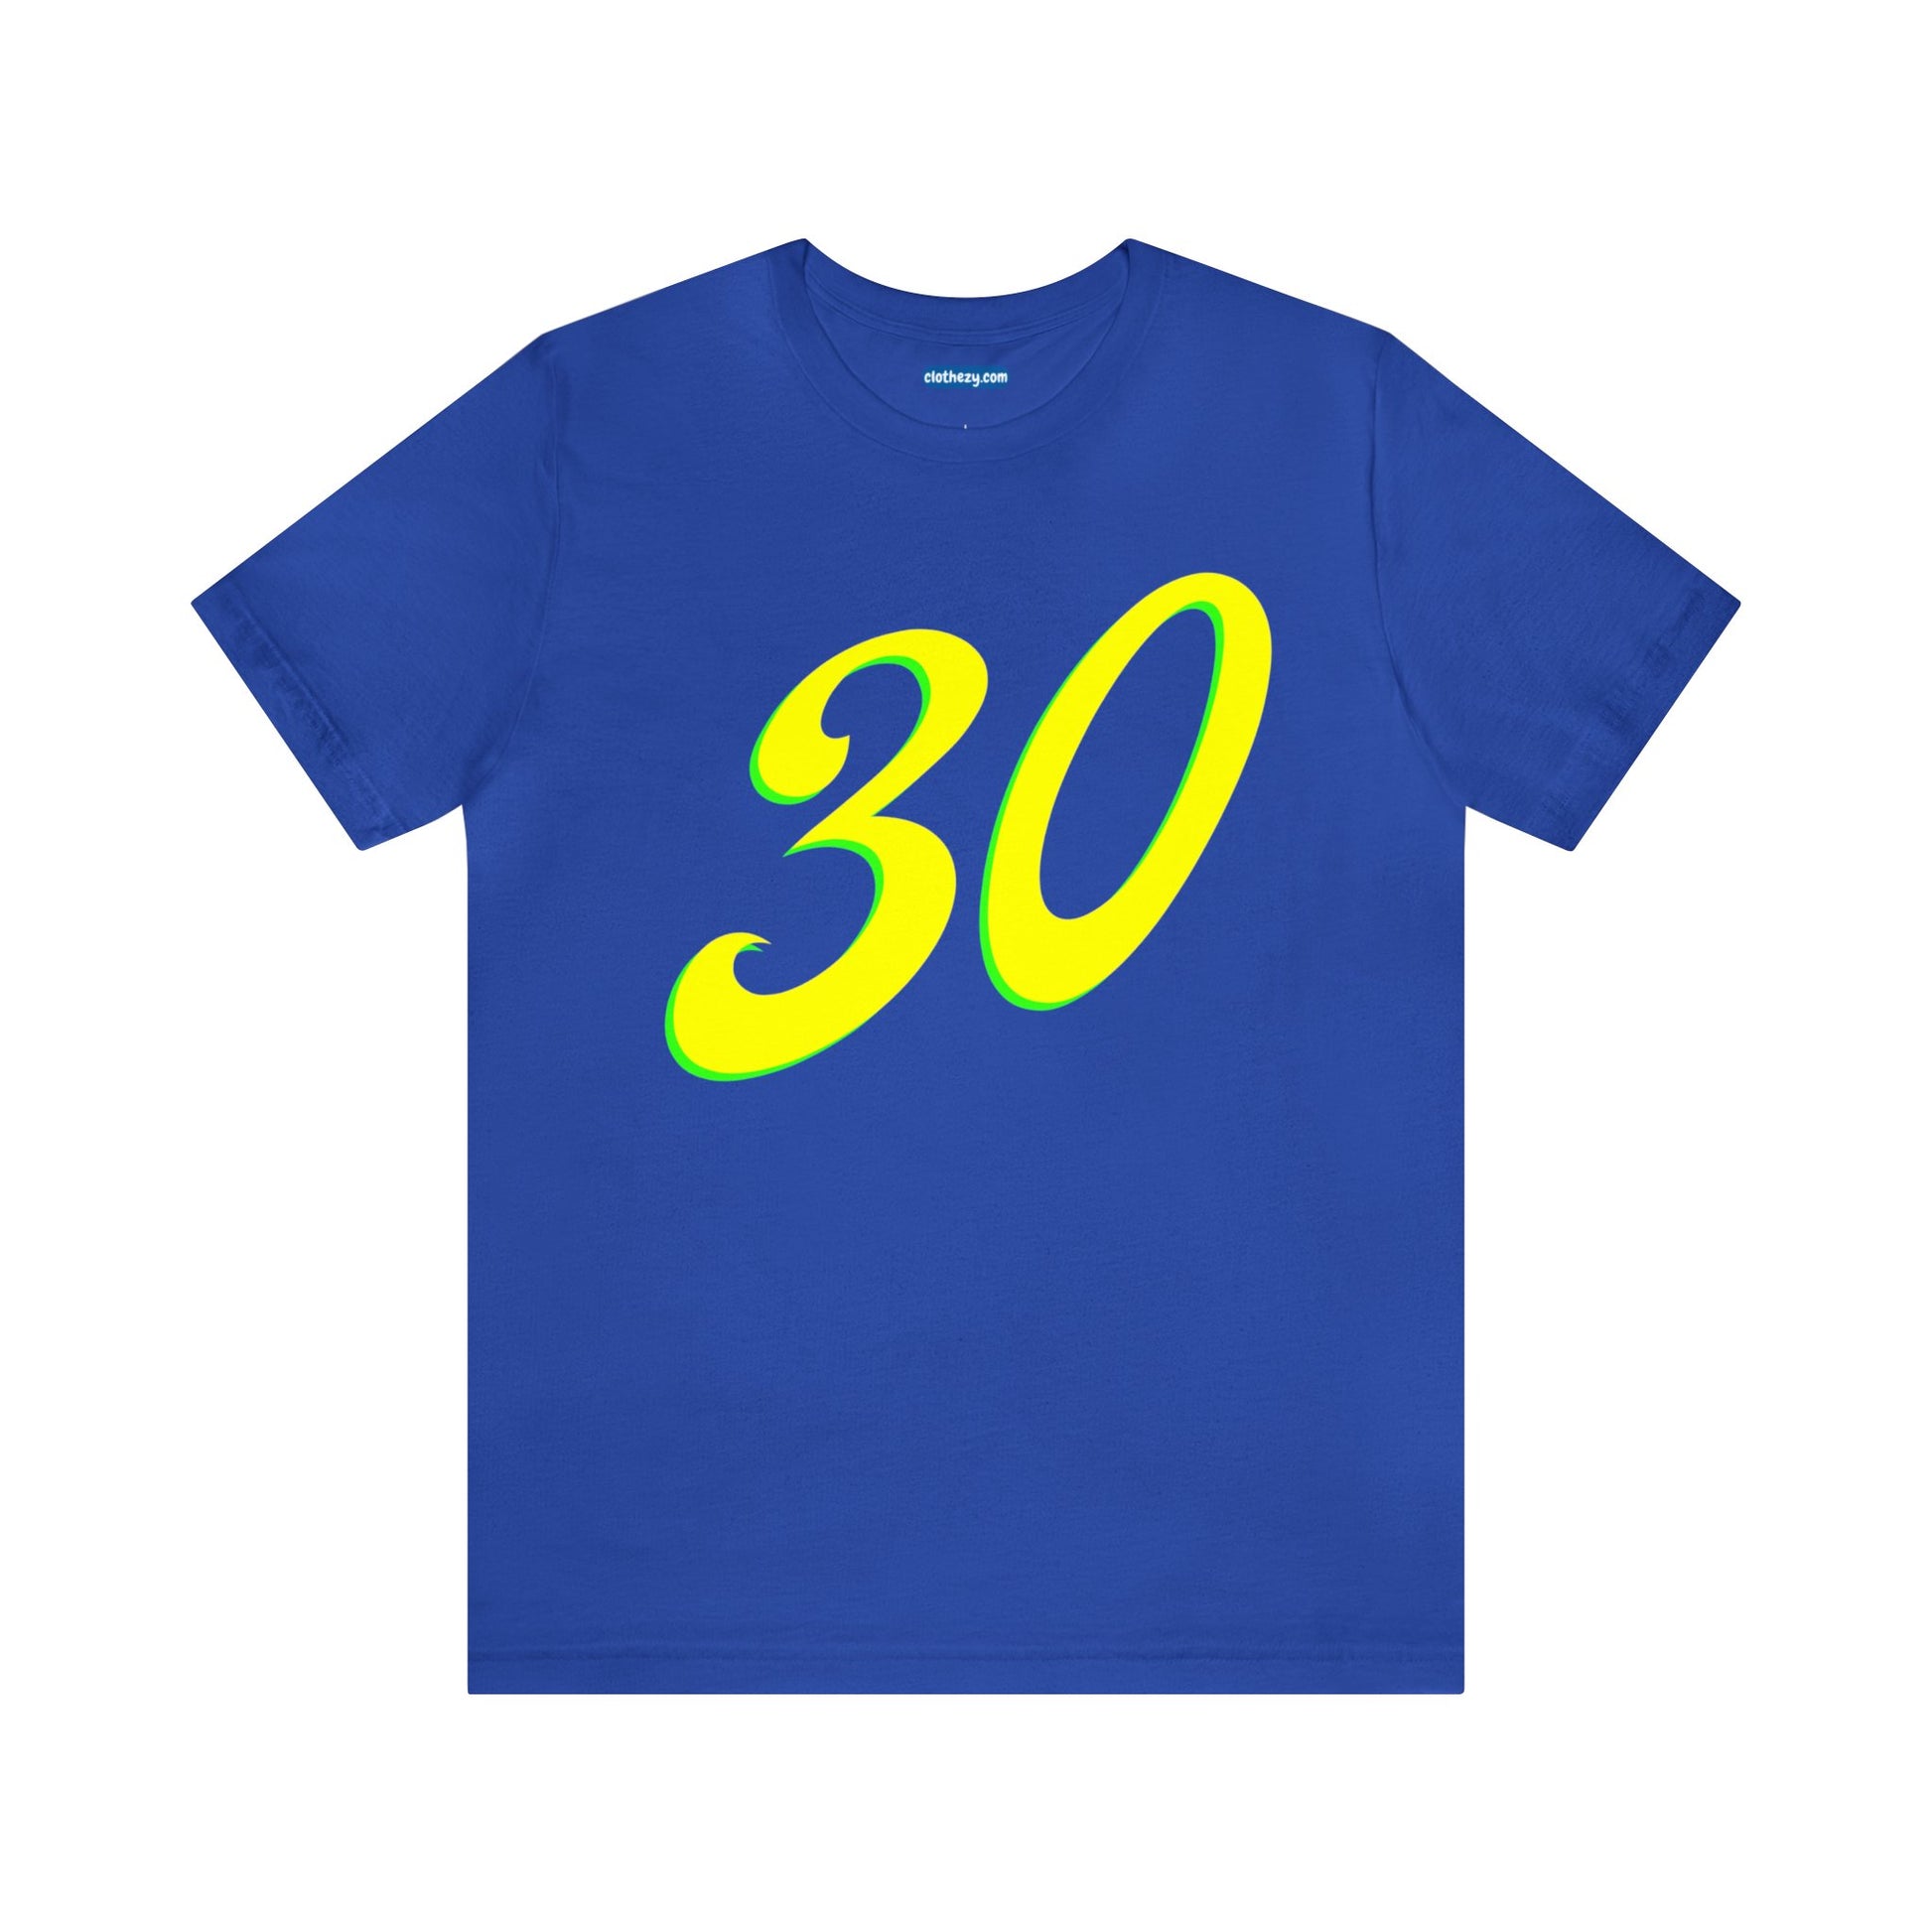 Number 30 Design - Soft Cotton Tee for birthdays and celebrations, Gift for friends and family, Multiple Options by clothezy.com in Royal Blue Size Small - Buy Now